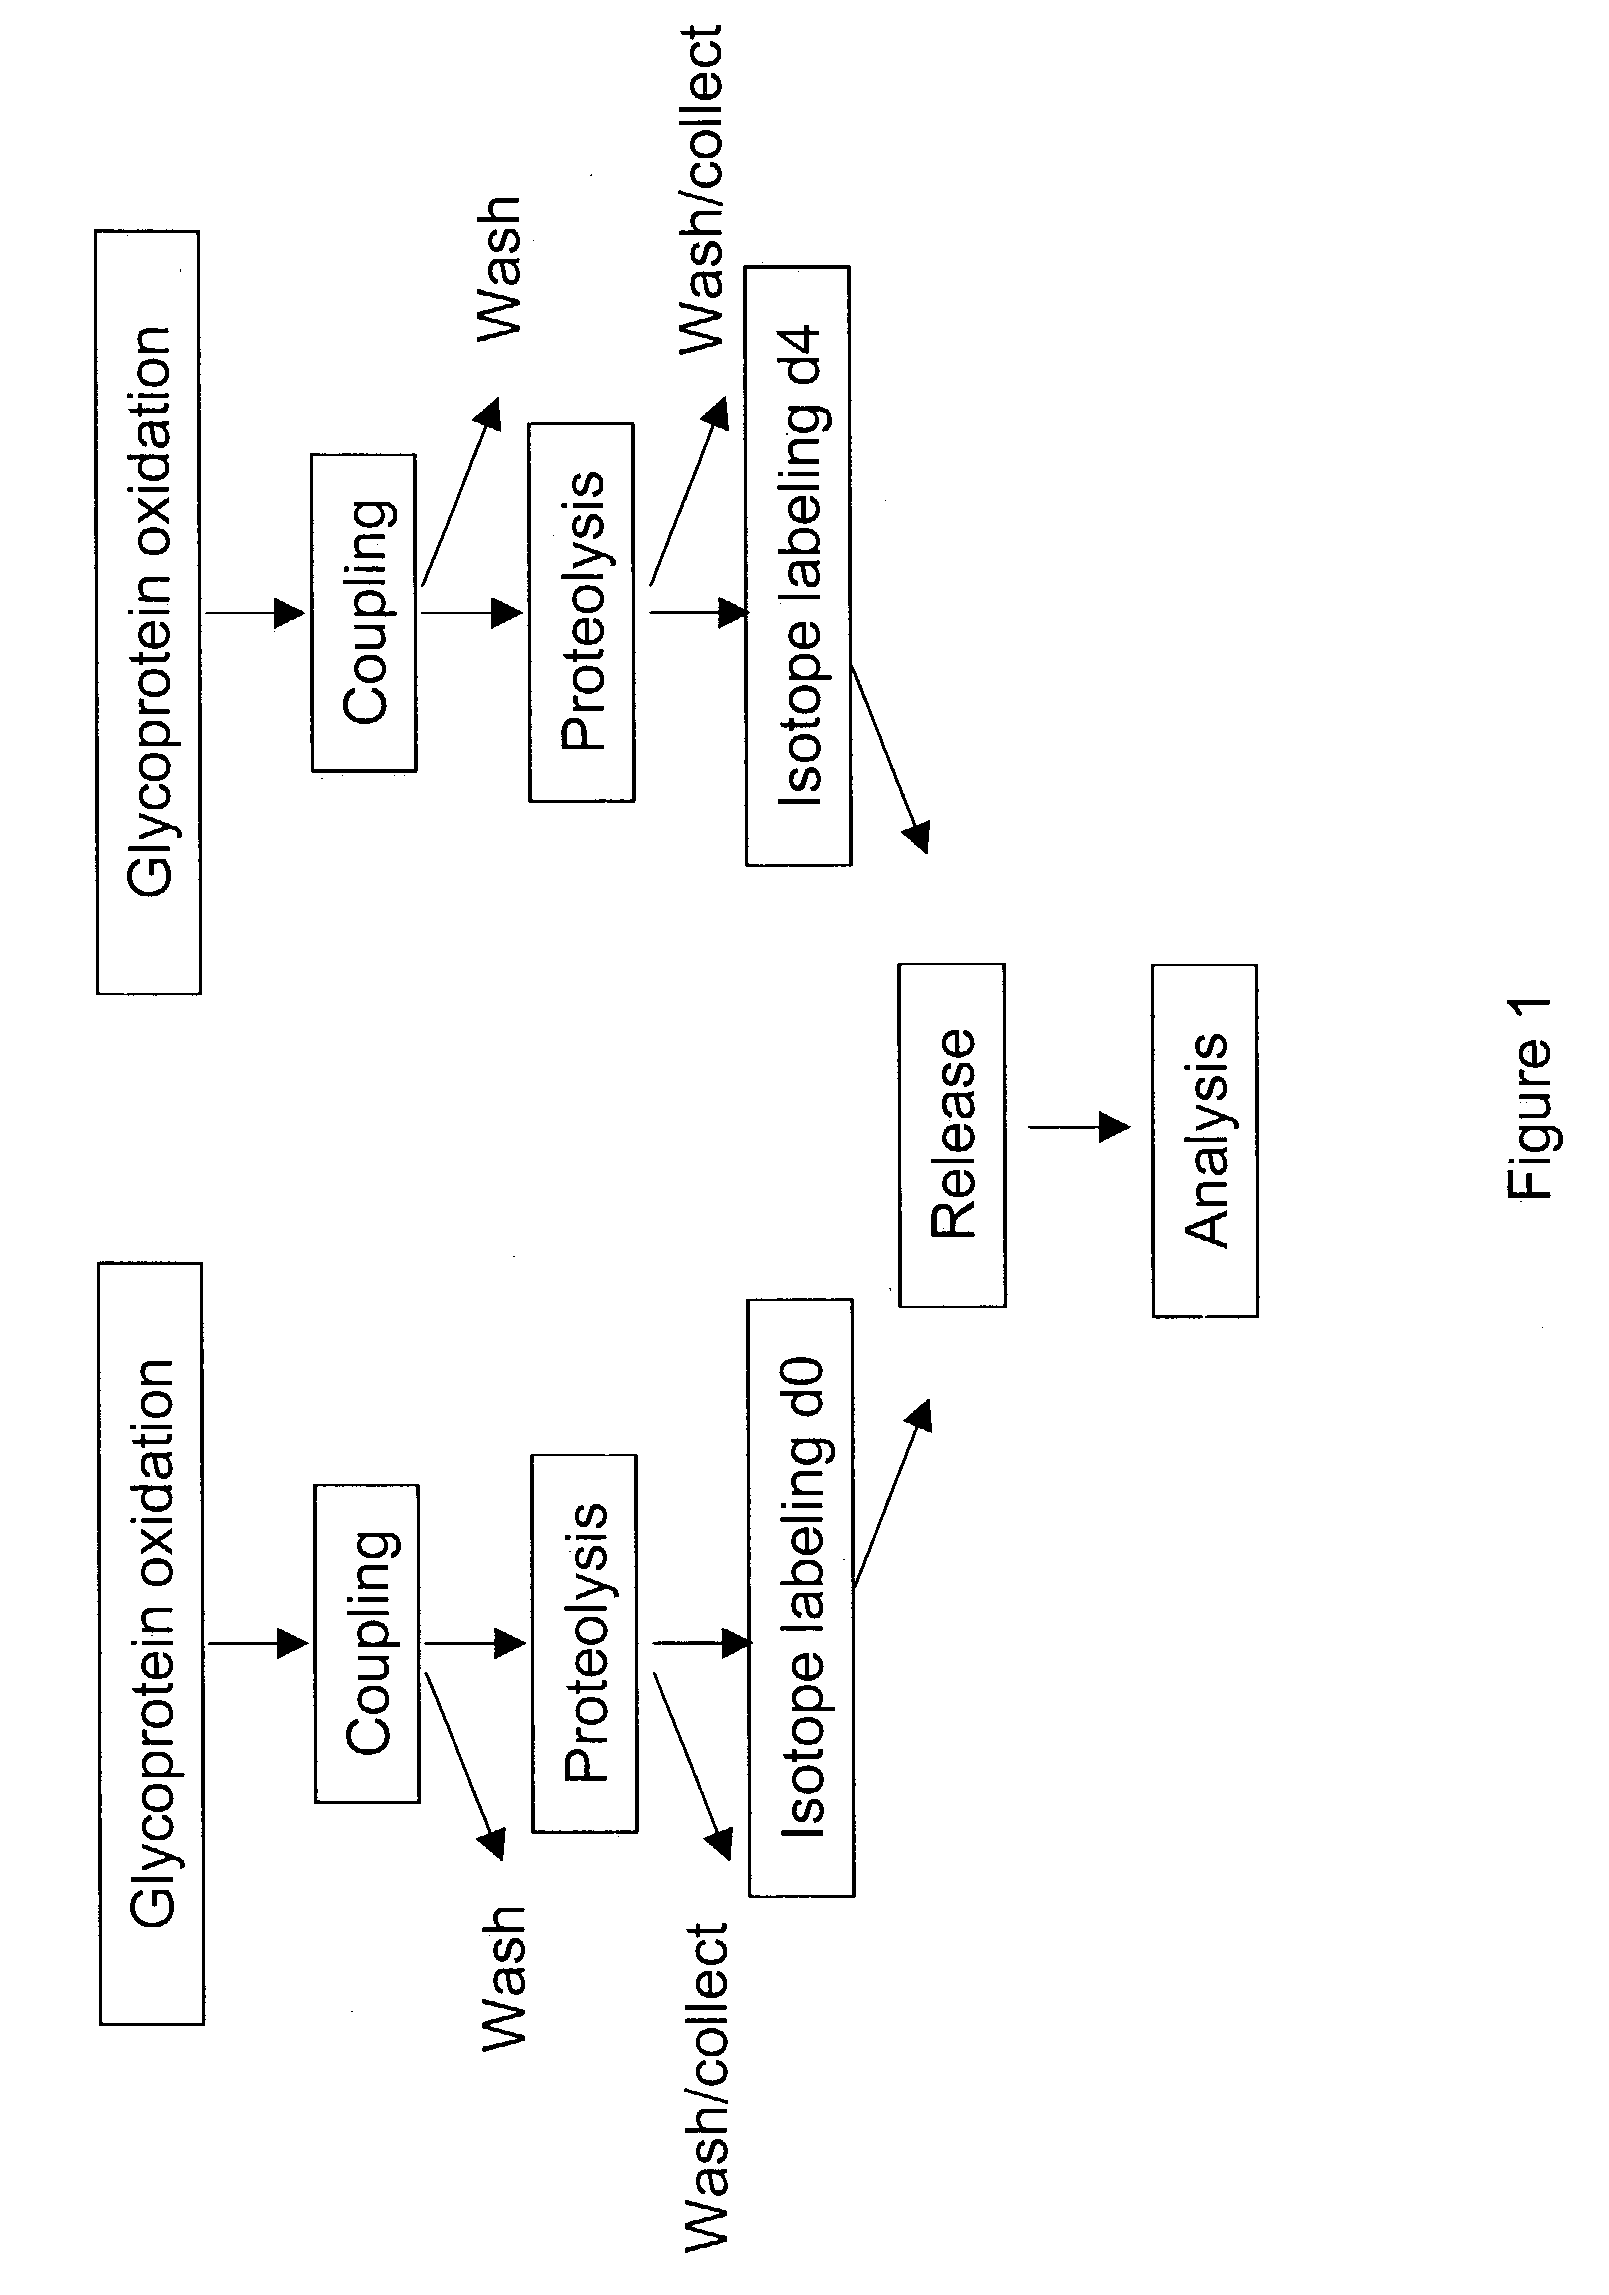 Methods for quantitative proteome analysis of glycoproteins